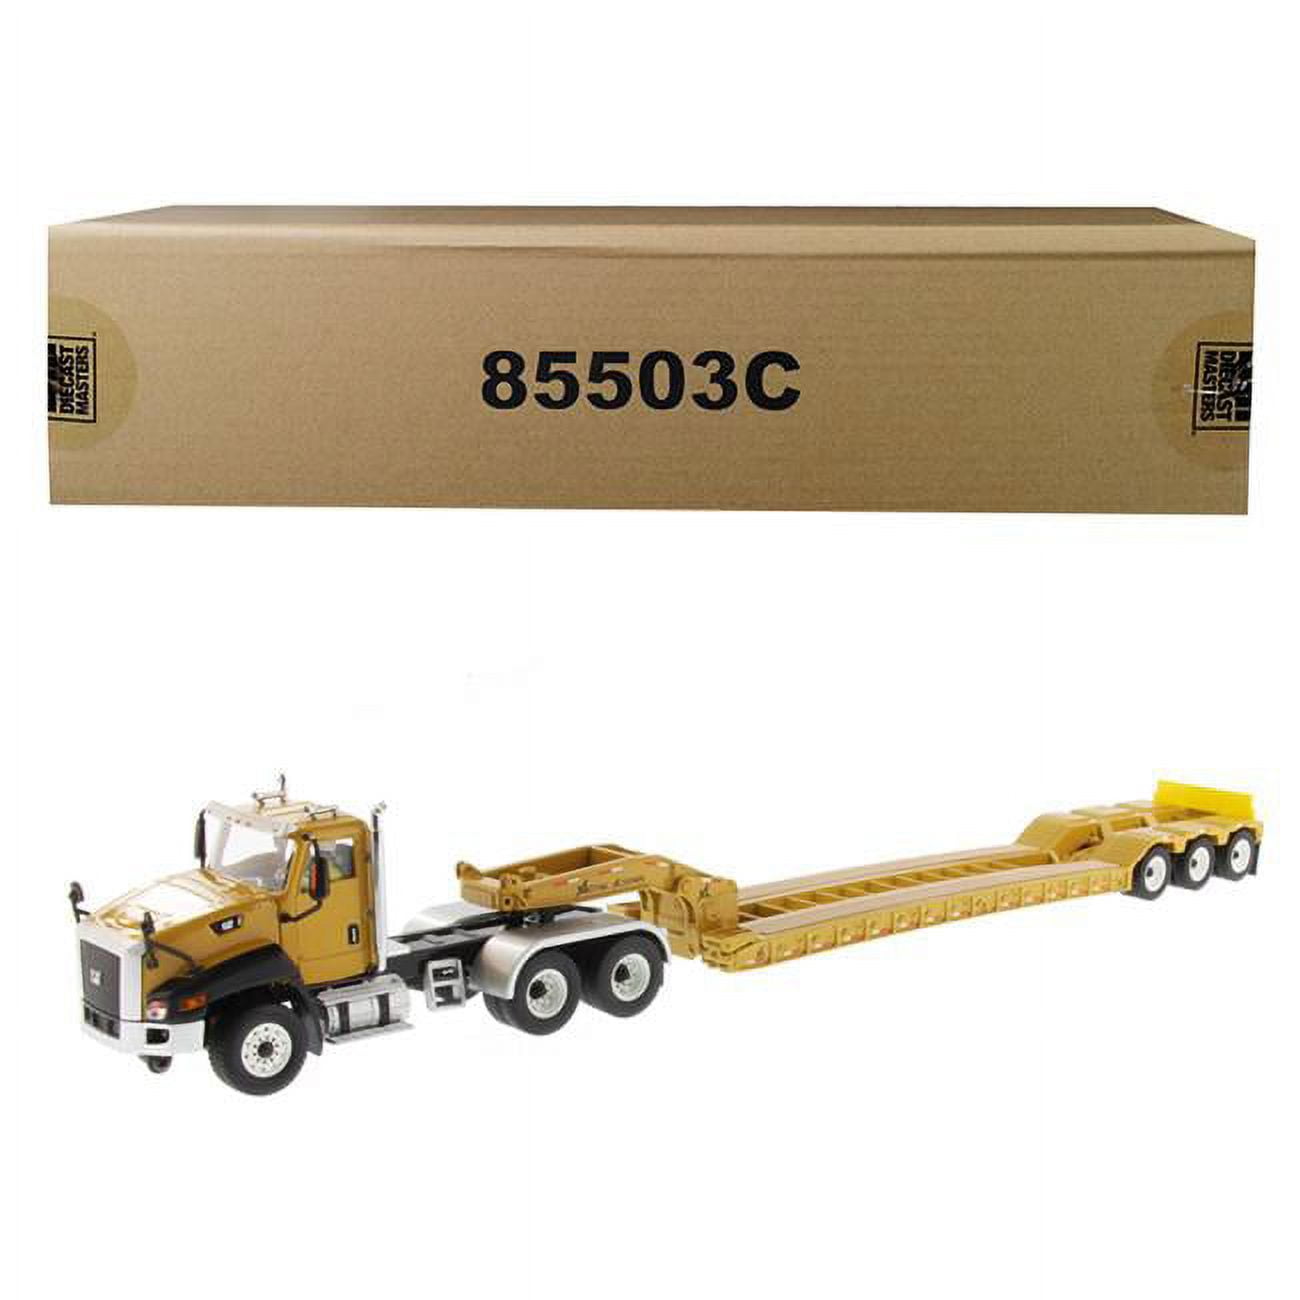 85503c Cat Caterpillar Ct660 Day Cab With Xl 120 Low-profile Hdg Lowboy Trailer & Operator Core Classics Series 1-50 Diecast Model